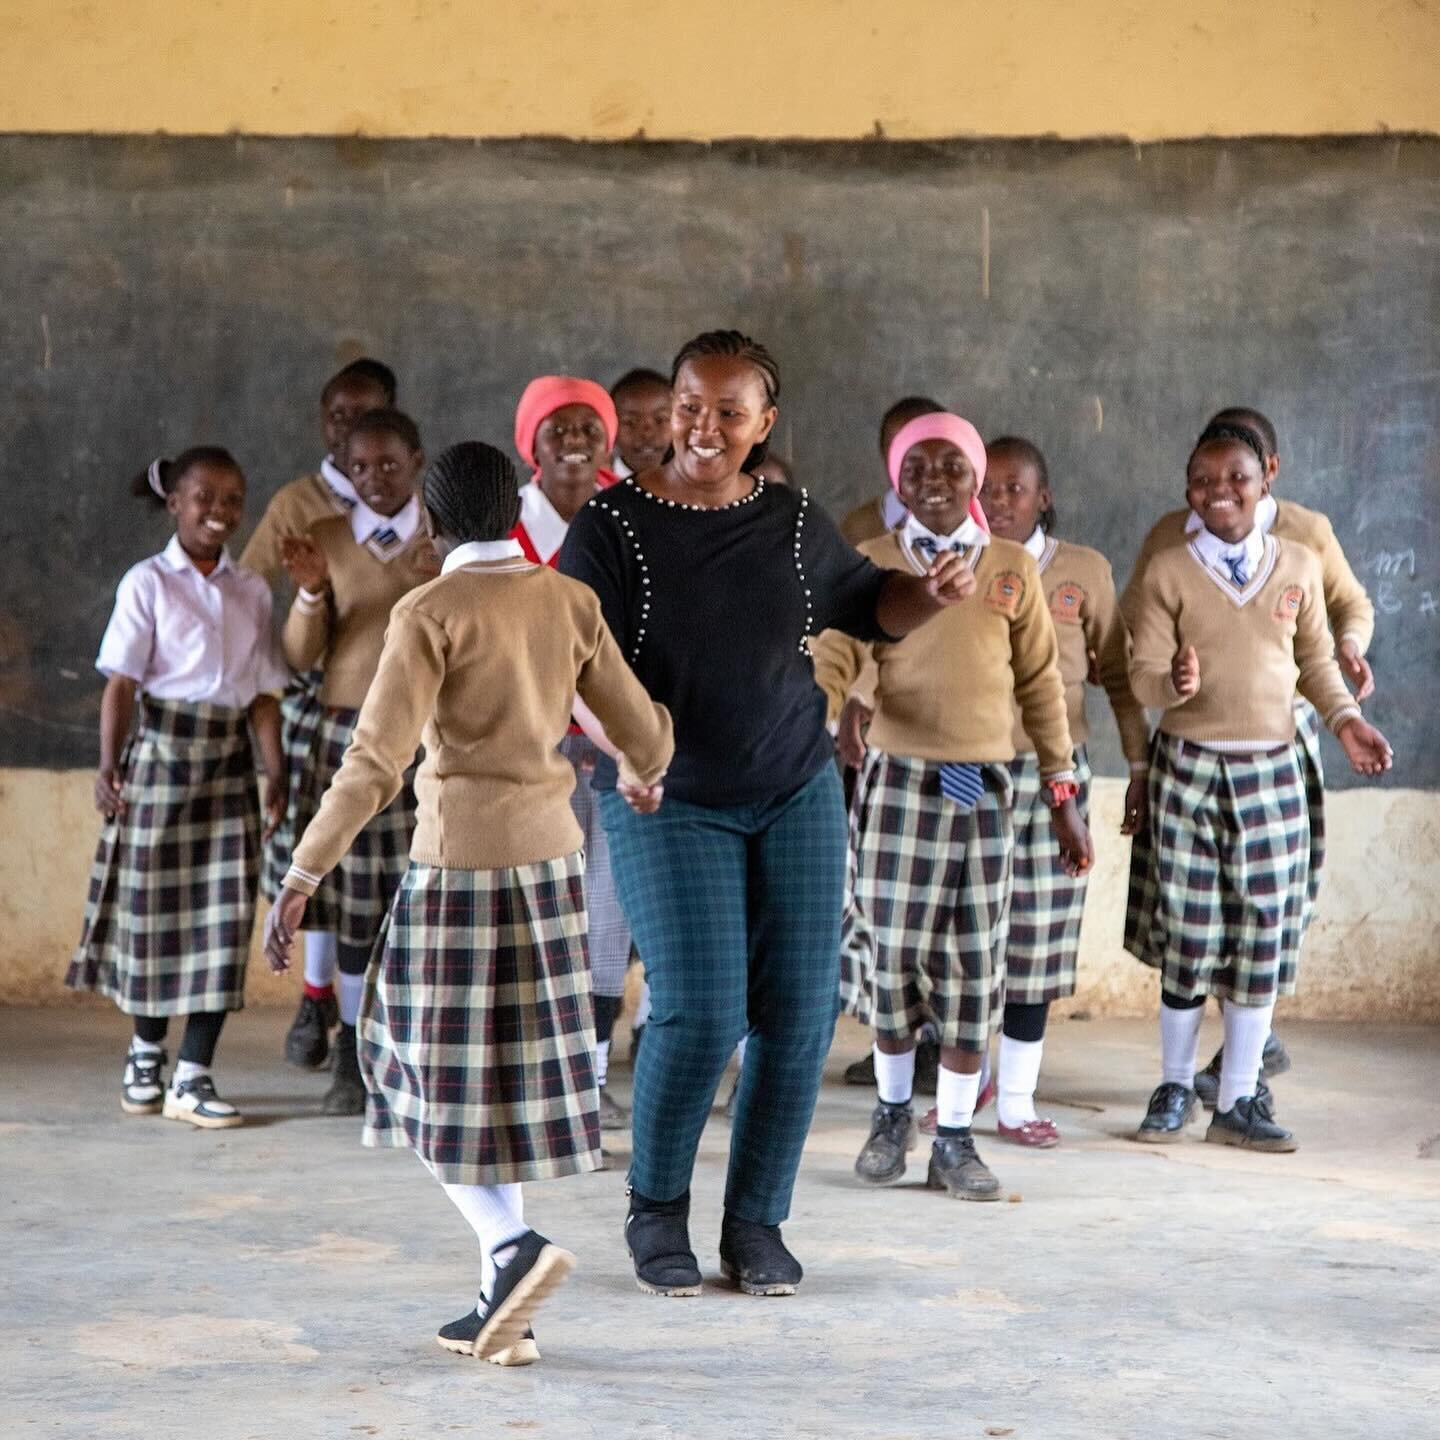 &ldquo;We are uniquely positioned to support the young adolescents we work with in our community. That privilege alone keeps me energized - I cannot let these girls down, so I keep moving.&rdquo; - Georgina Ngugi, Director of Programs

With more than